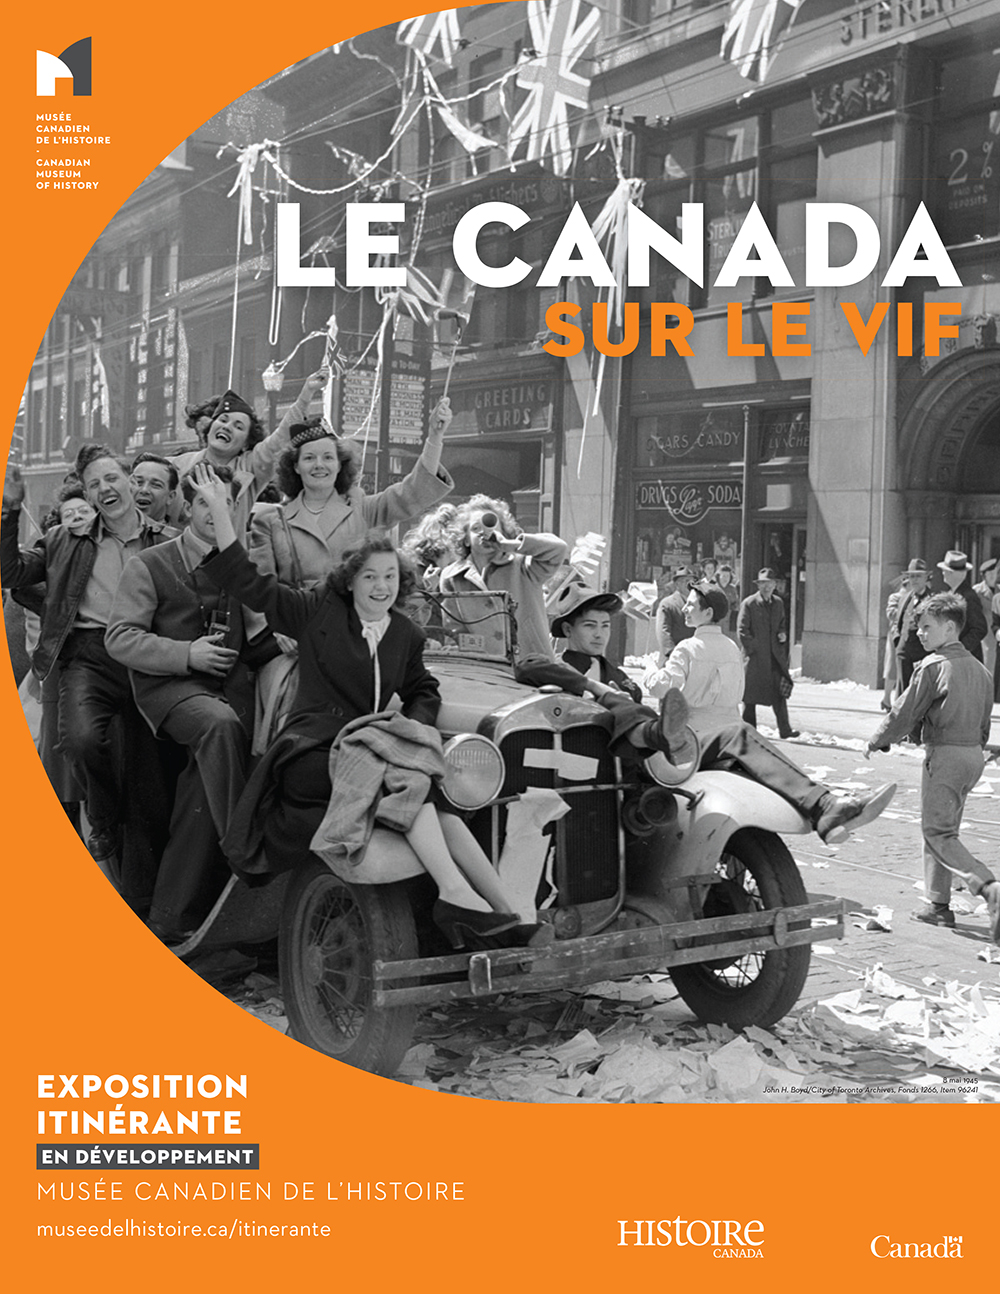 This image shows a historic photograph with the exhibit title "Snapshots of Canada." 